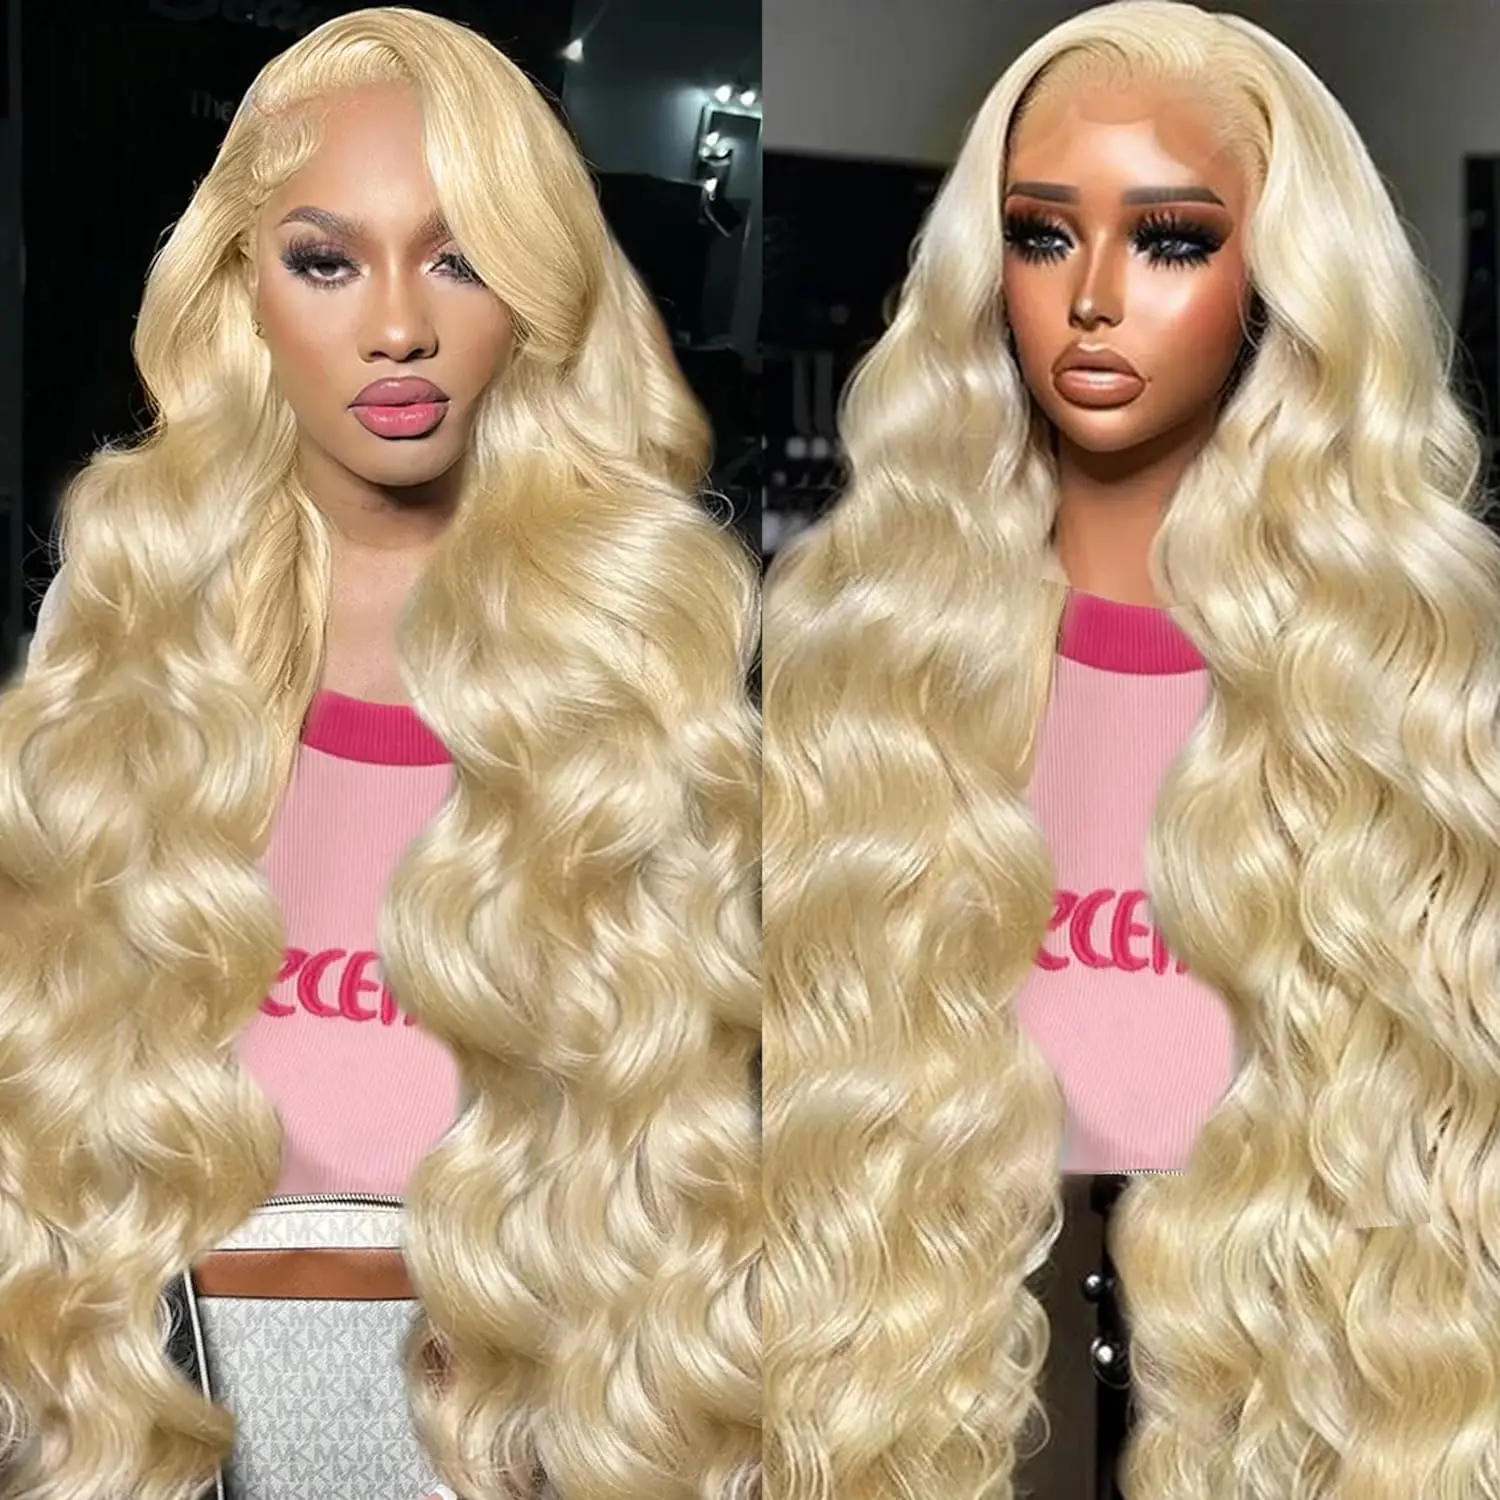 

Wiggogo 613 Hd Lace Frontal Wig Blonde Lace Front Wig 13X6 13X4 Lace Front Human Hair Wig Glueless Body Wave Lace Front Wig